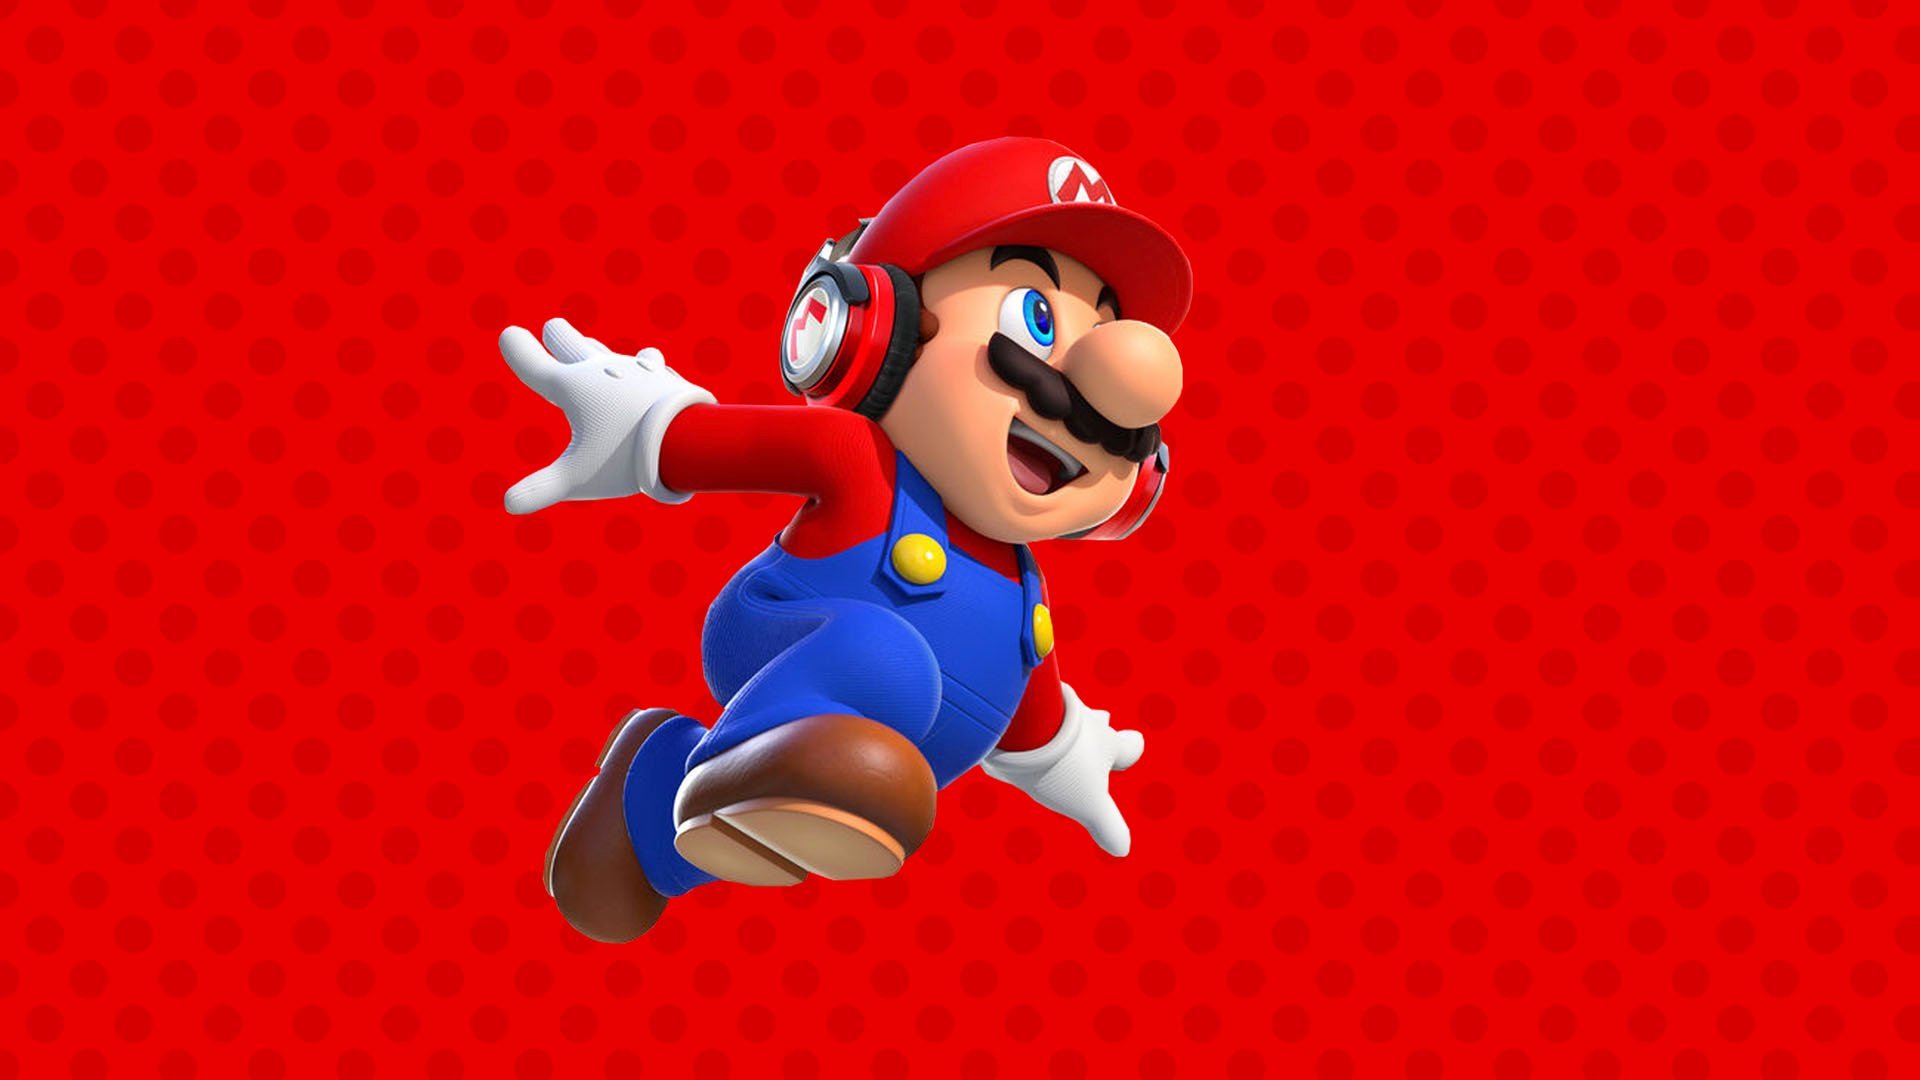 Super Mario Run still lives, gets promotion for New Super Mario Bros. U Deluxe on Switch